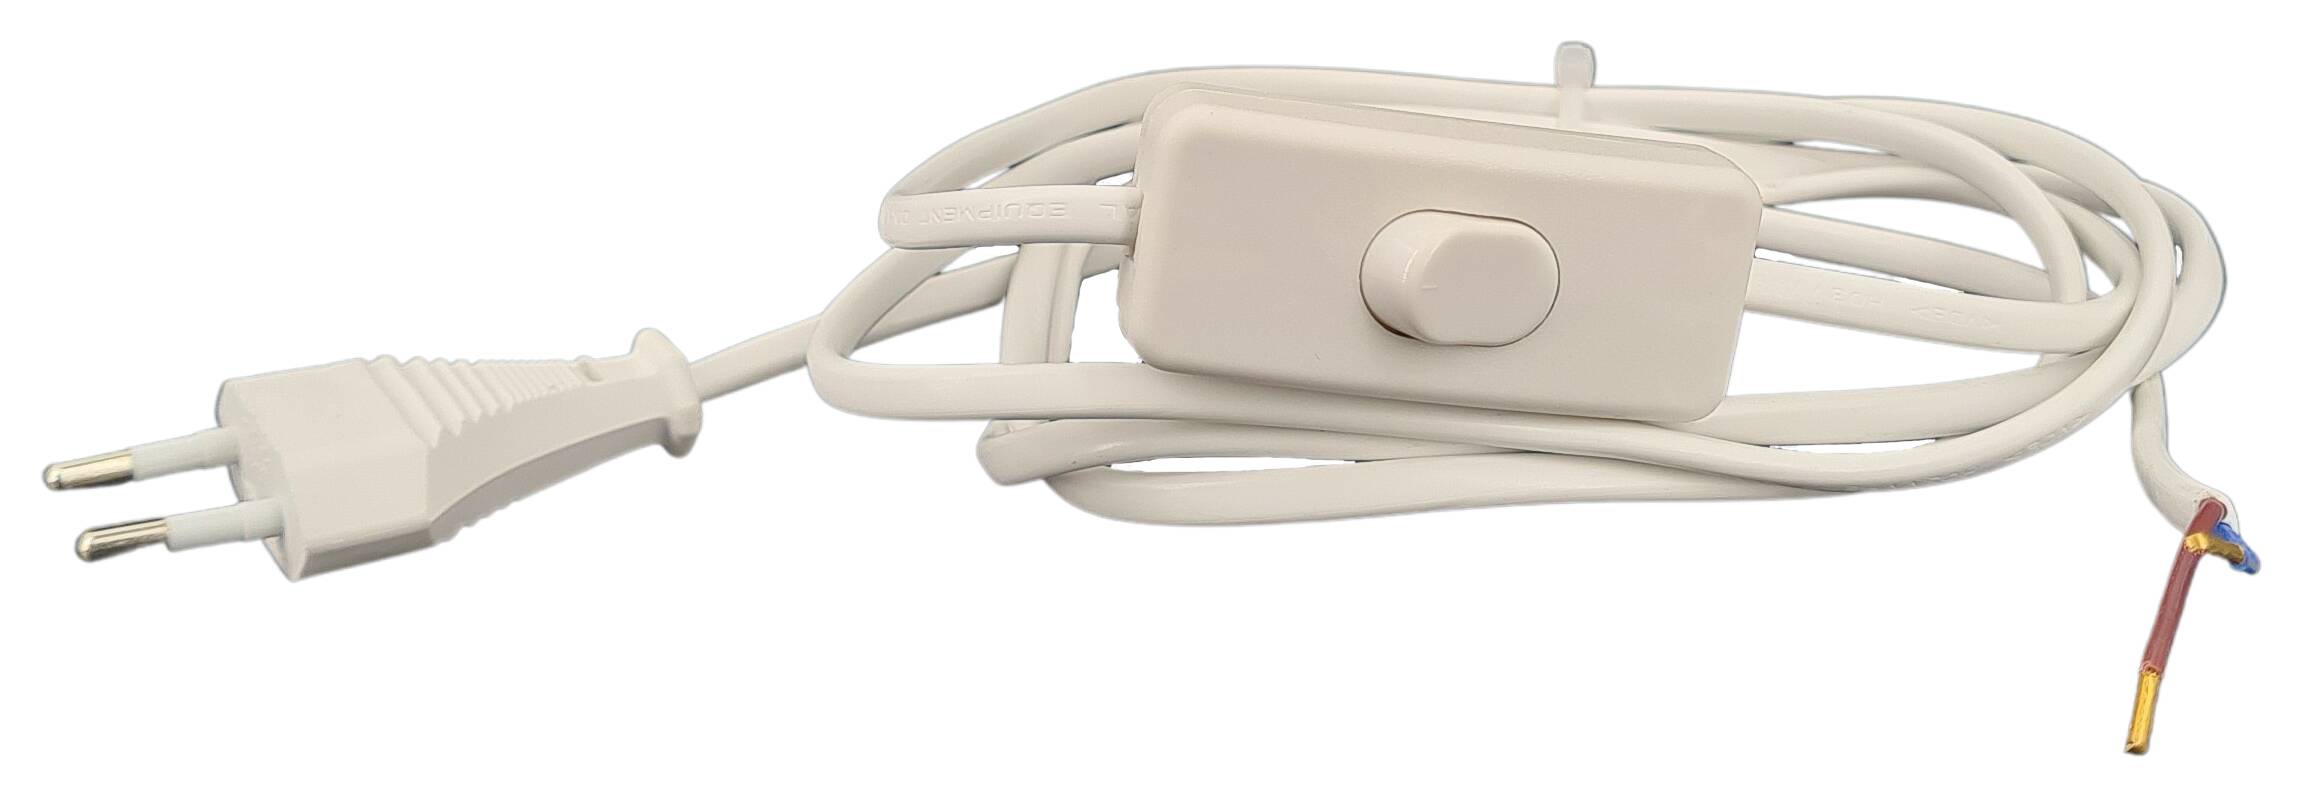 cord-set 2x0,75/1500/500 flat with Euro plug and handswitch white